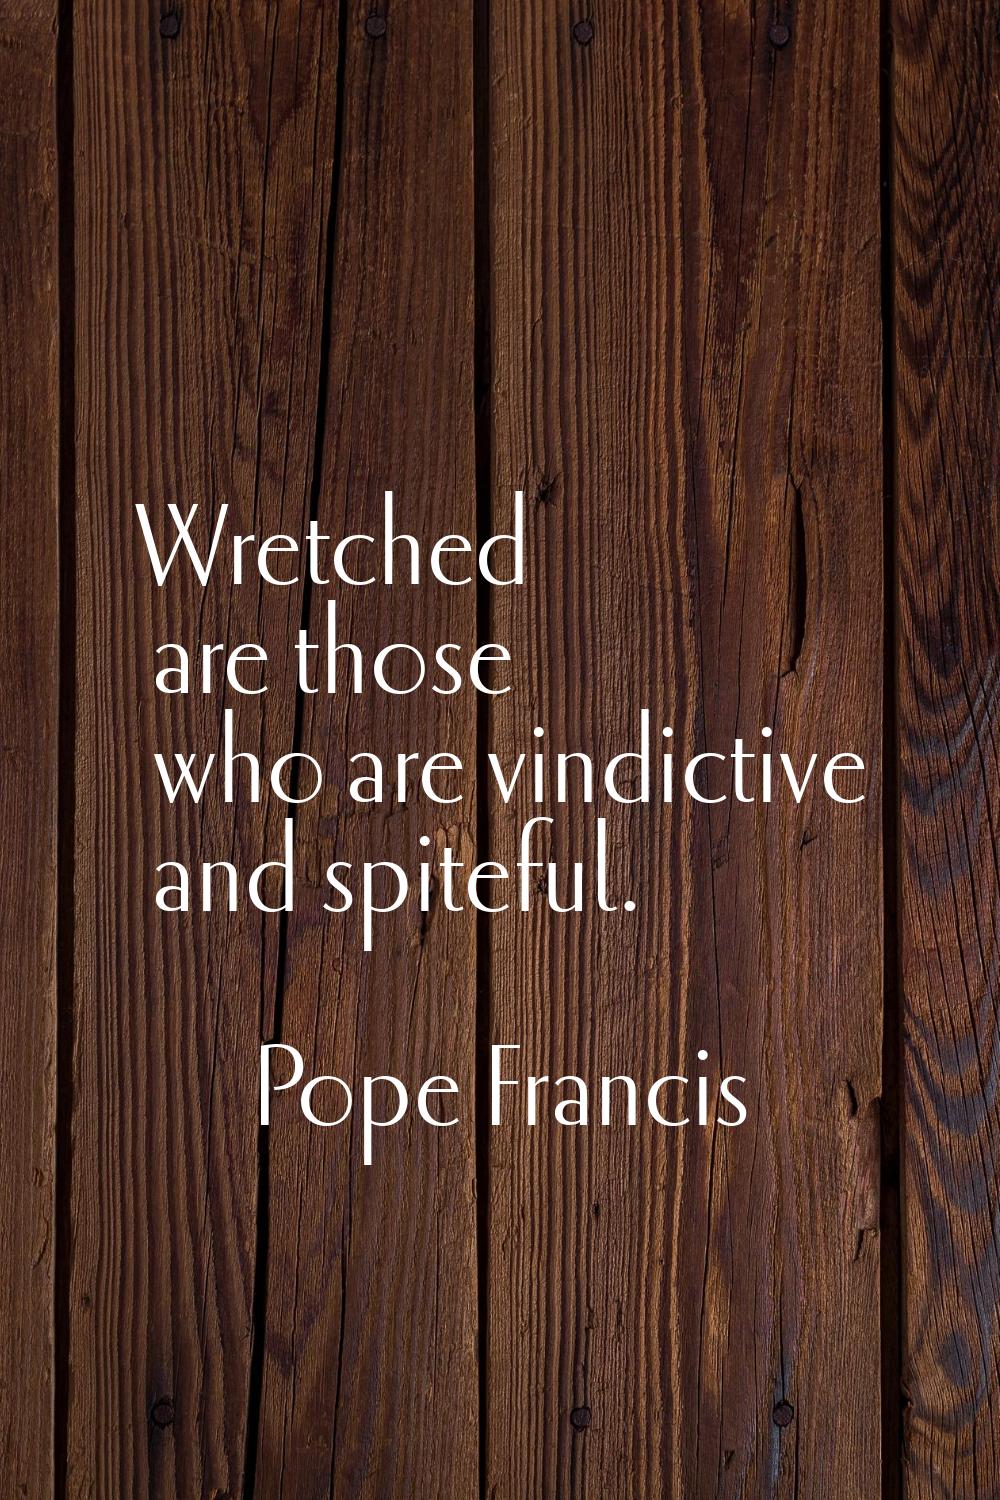 Wretched are those who are vindictive and spiteful.